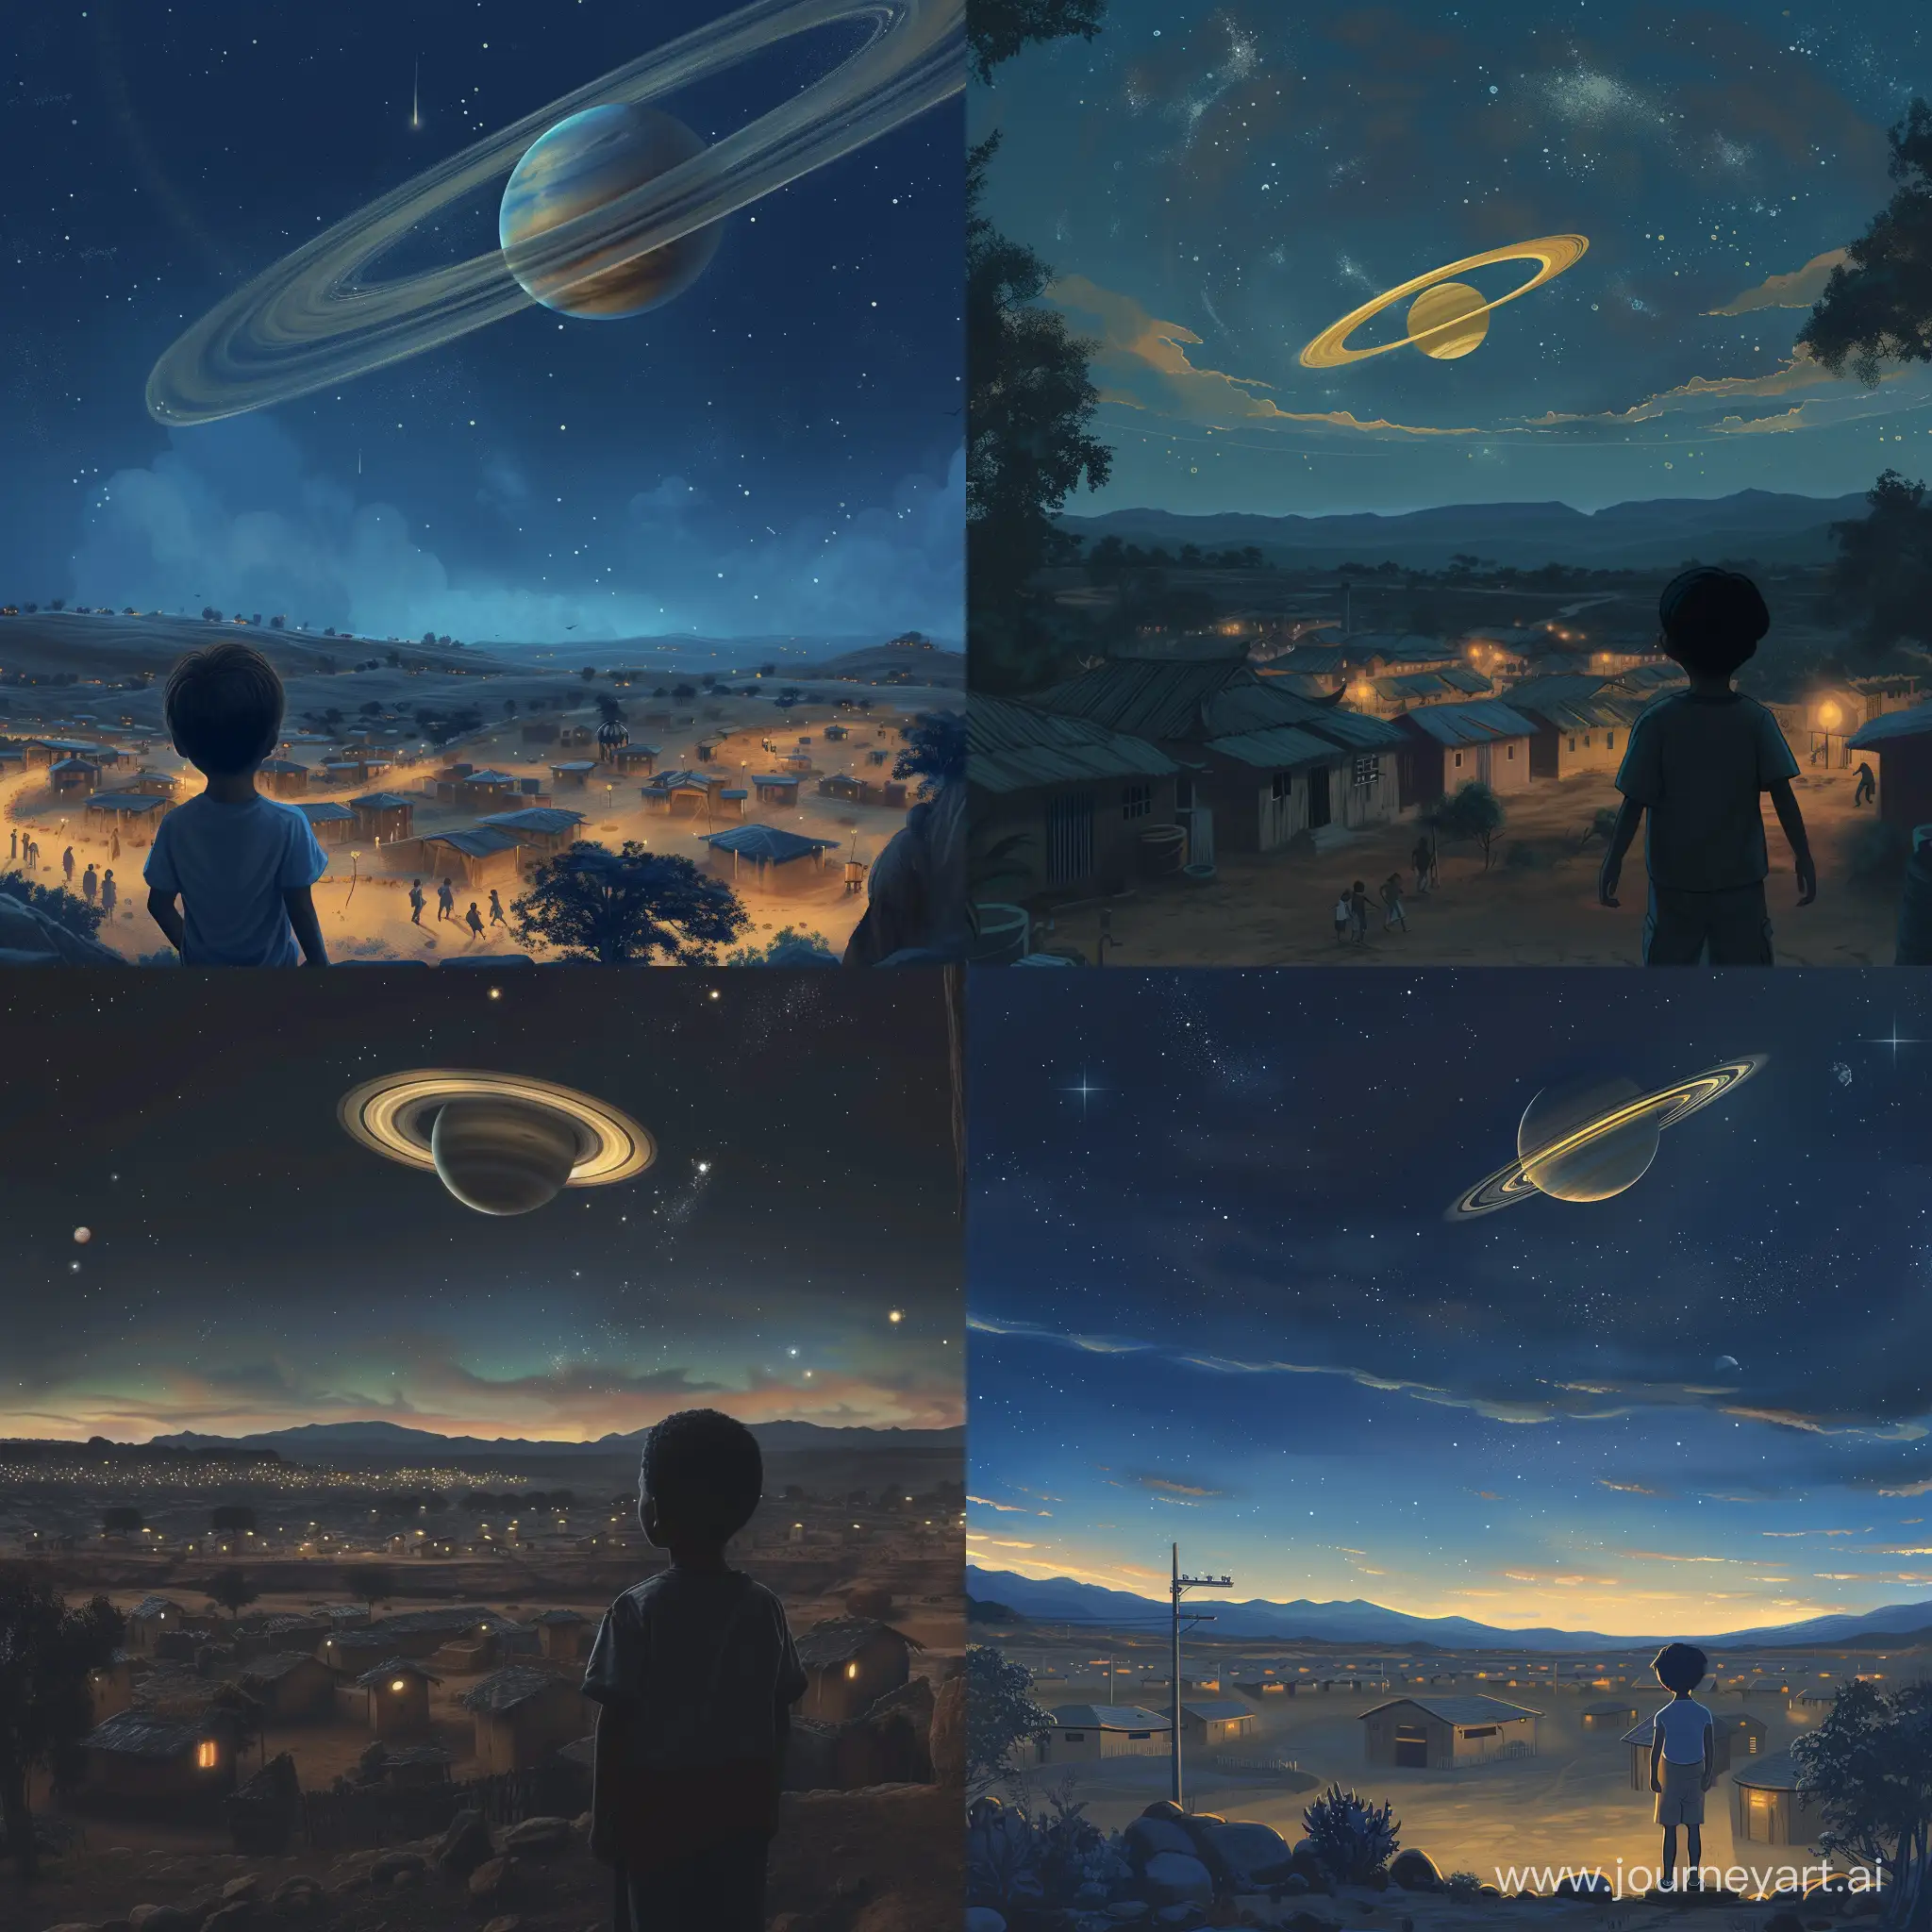 a view from a boy looking up at the sky and seeing a planet similar to saturn sitting close, almost close enough to touch. its huge in the night sky...the boy is in a well organized village at dusk